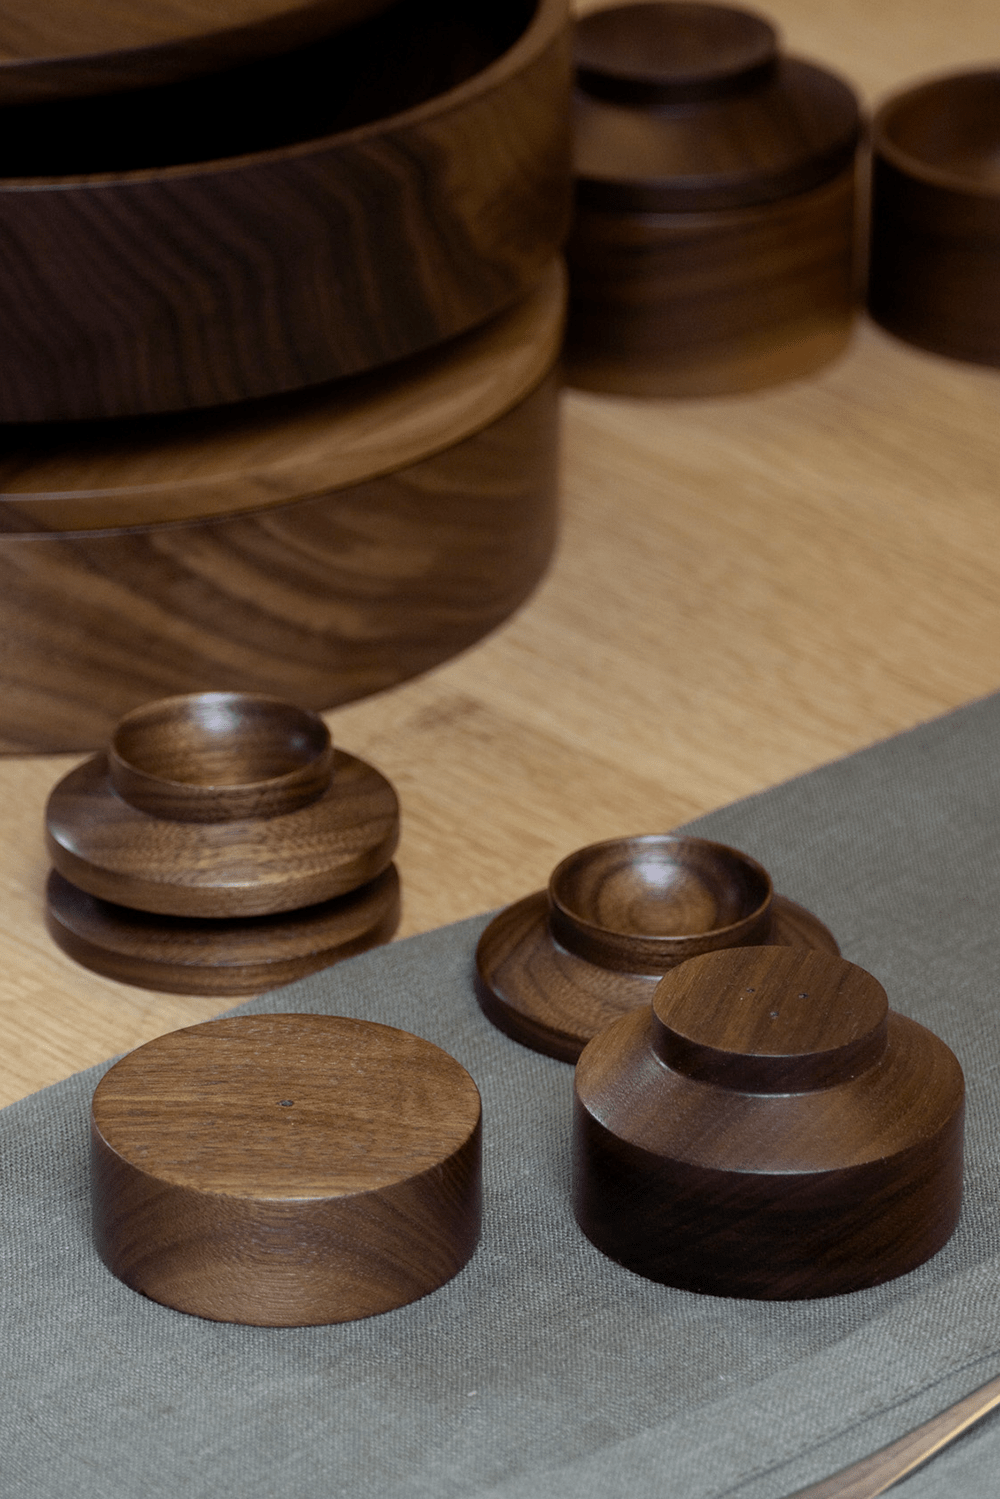 Repeat Stackable Egg Set by Het Houtlokaal - Handcrafted from dark walnut wood, these modular and stackable egg cups are designed for both functionality and aesthetics. The set also includes pepper and salt shakers.